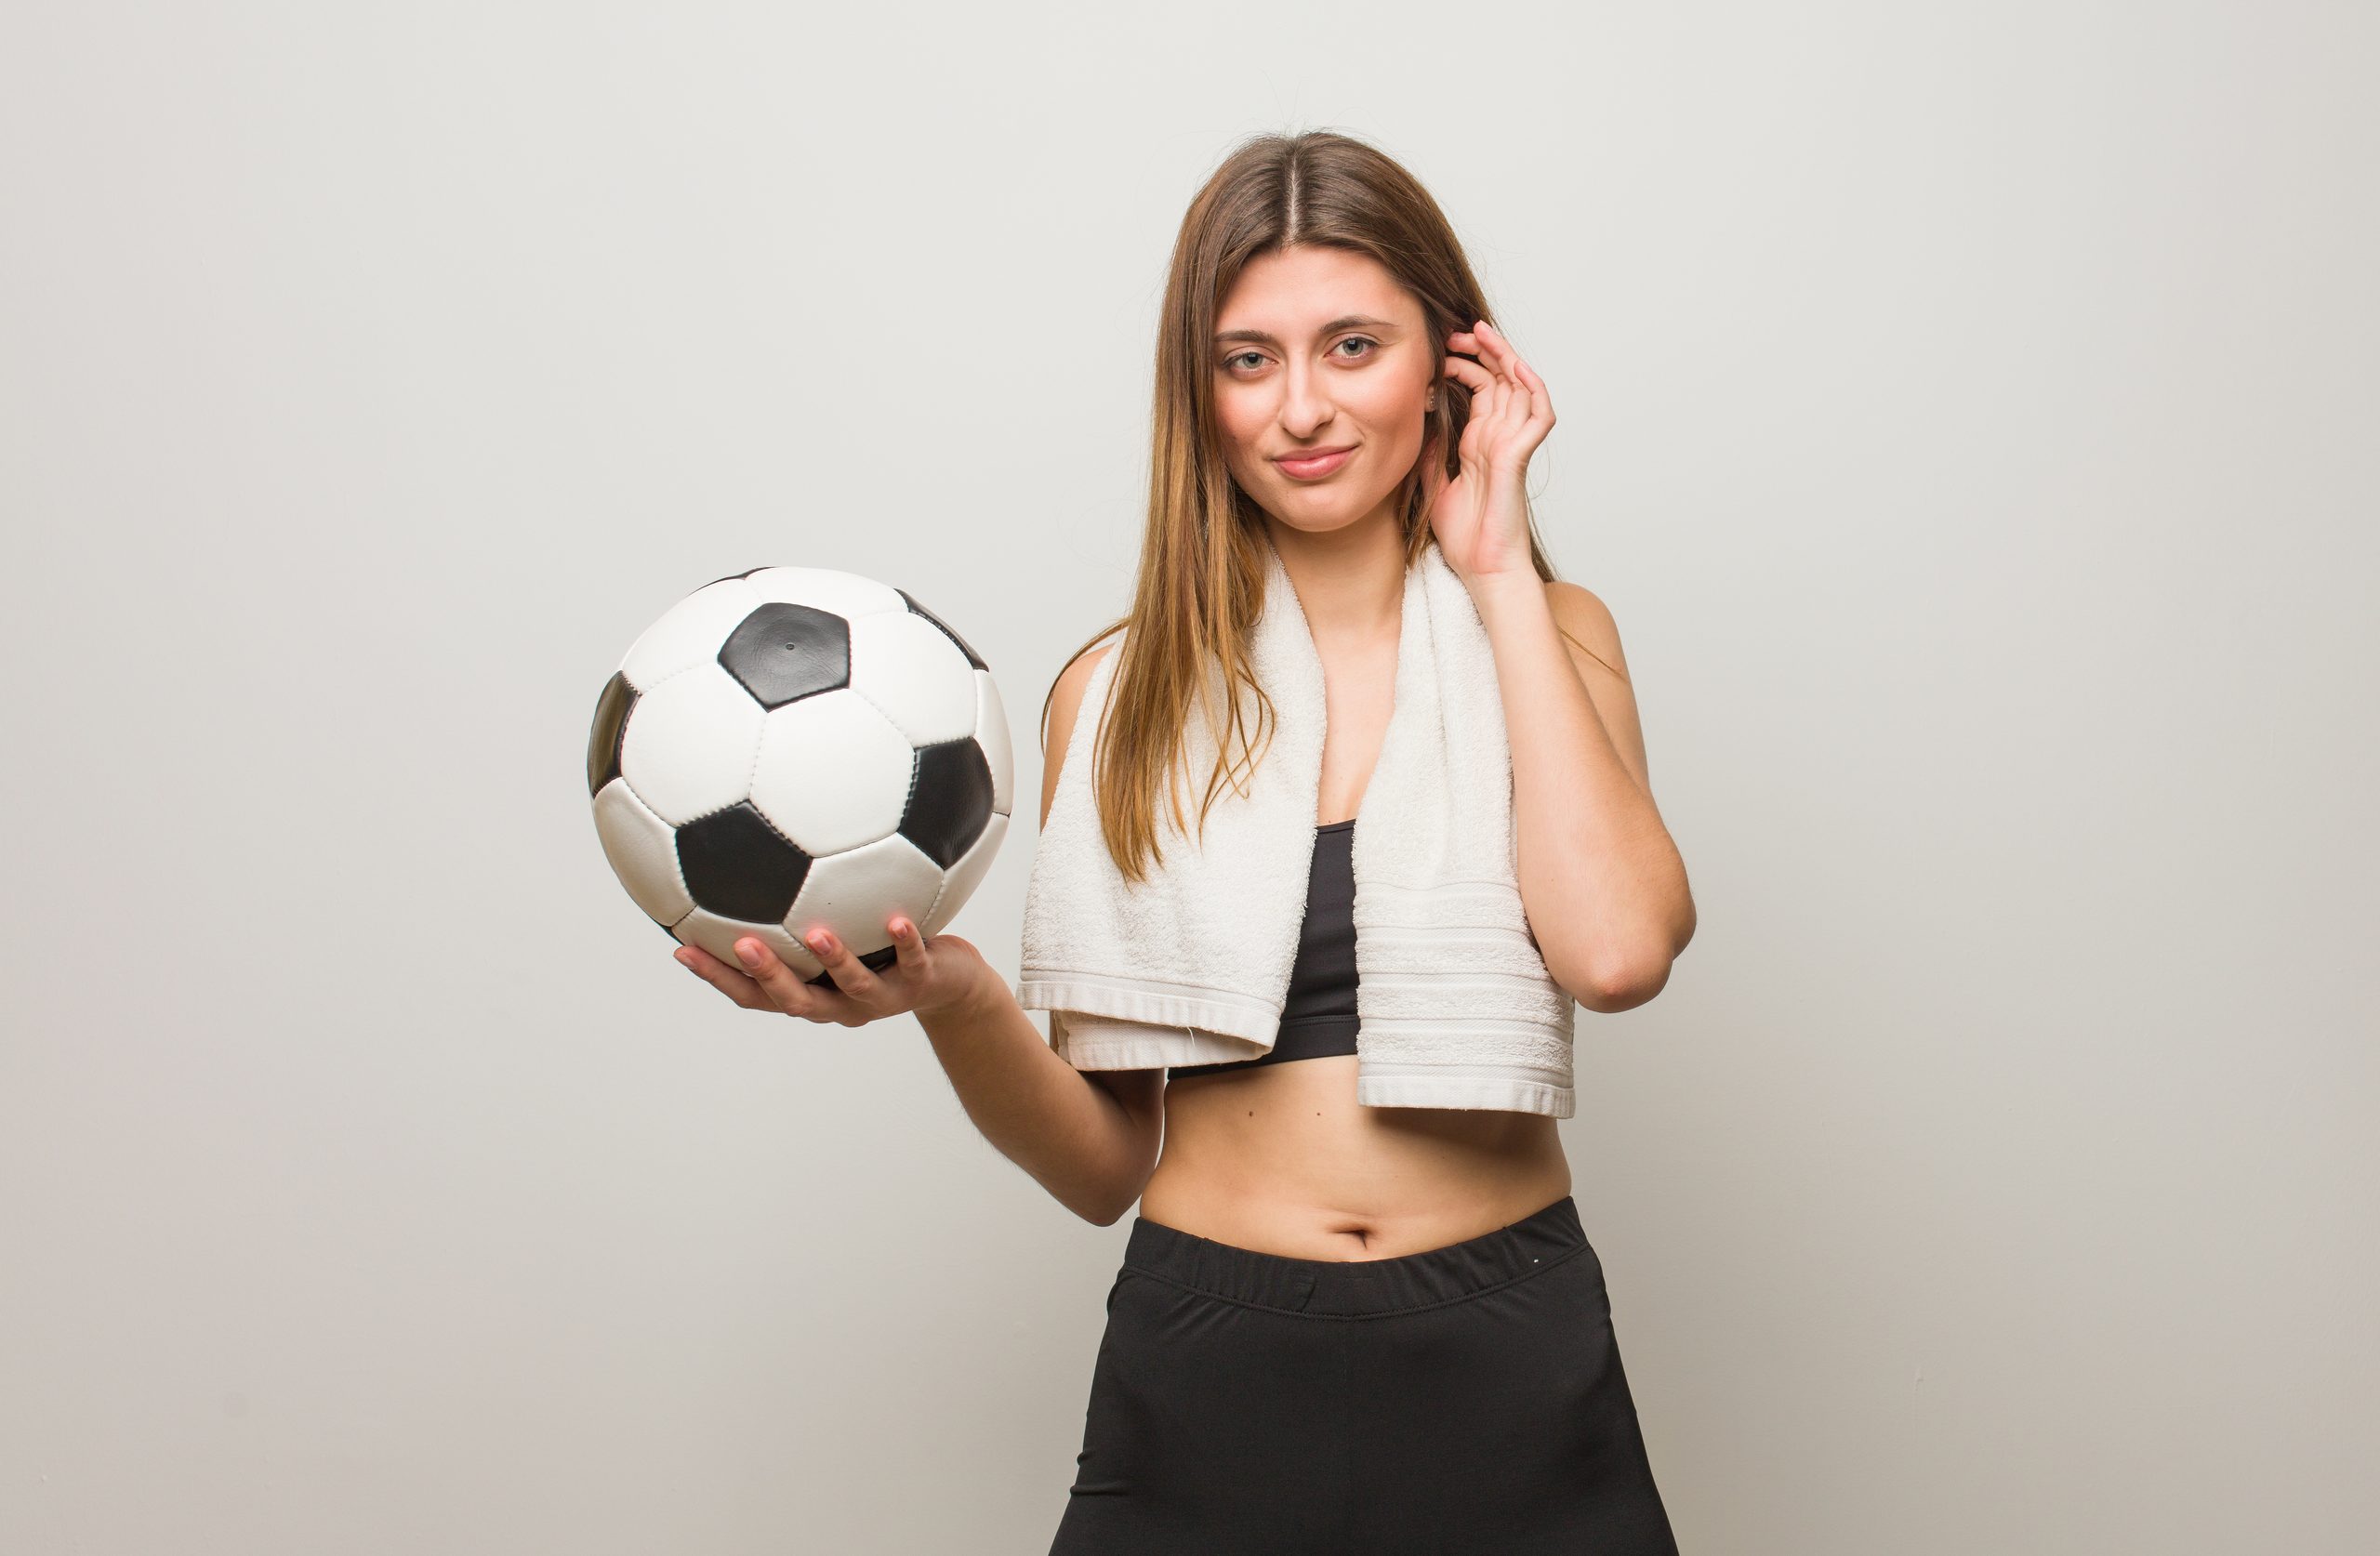 Young fitness russian woman covering ears with hands. Holding a soccer ball.